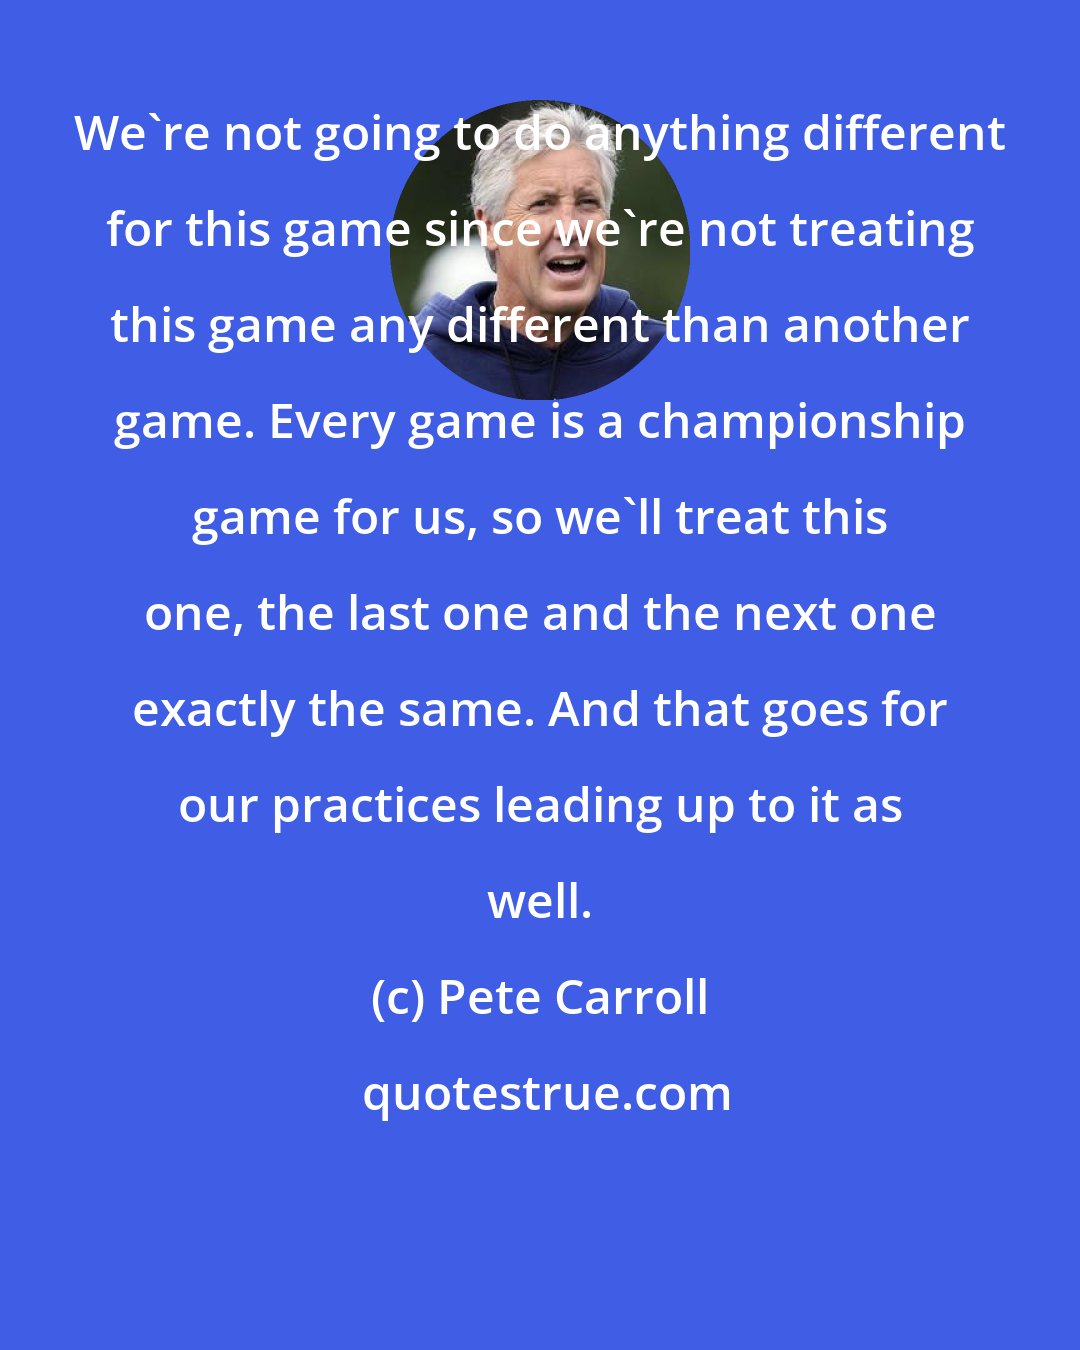 Pete Carroll: We're not going to do anything different for this game since we're not treating this game any different than another game. Every game is a championship game for us, so we'll treat this one, the last one and the next one exactly the same. And that goes for our practices leading up to it as well.